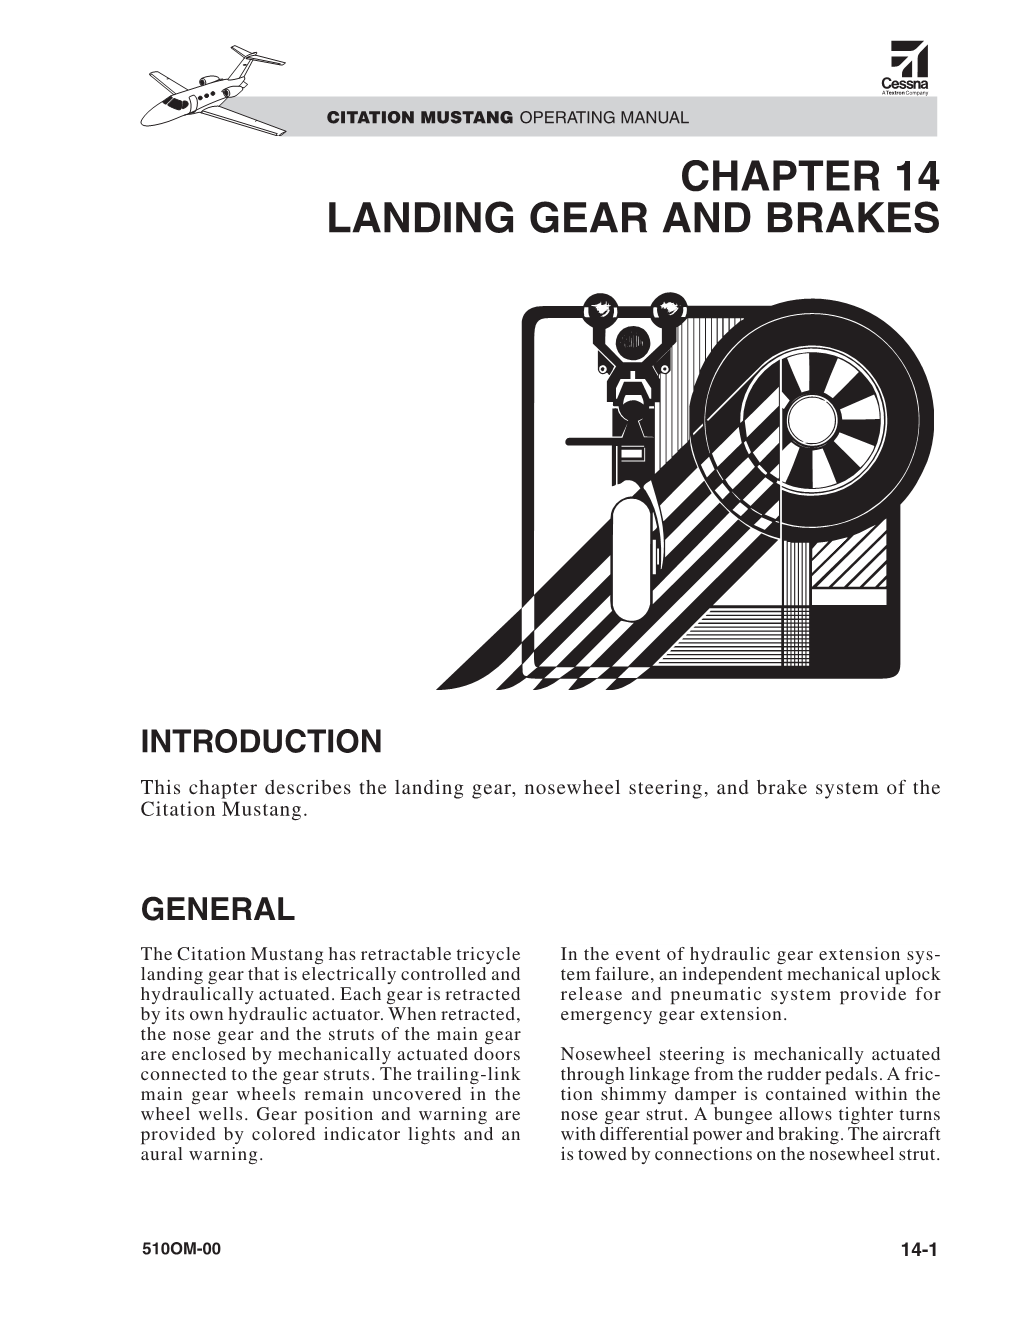 Chapter 14 Landing Gear and Brakes